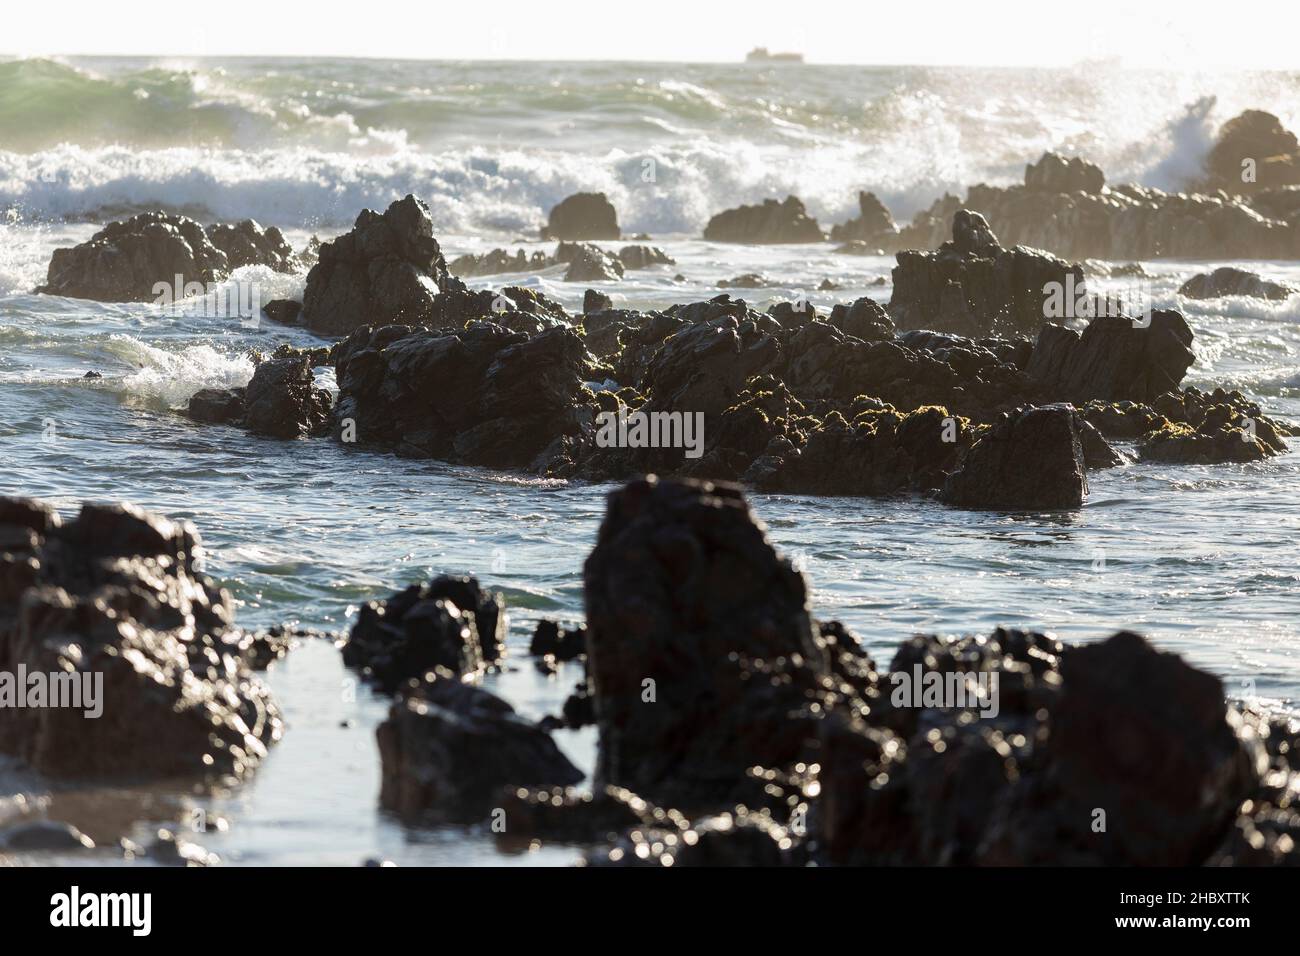 Jagged rocks and waves breaking on shore on the Atlantic coastline. Stock Photo